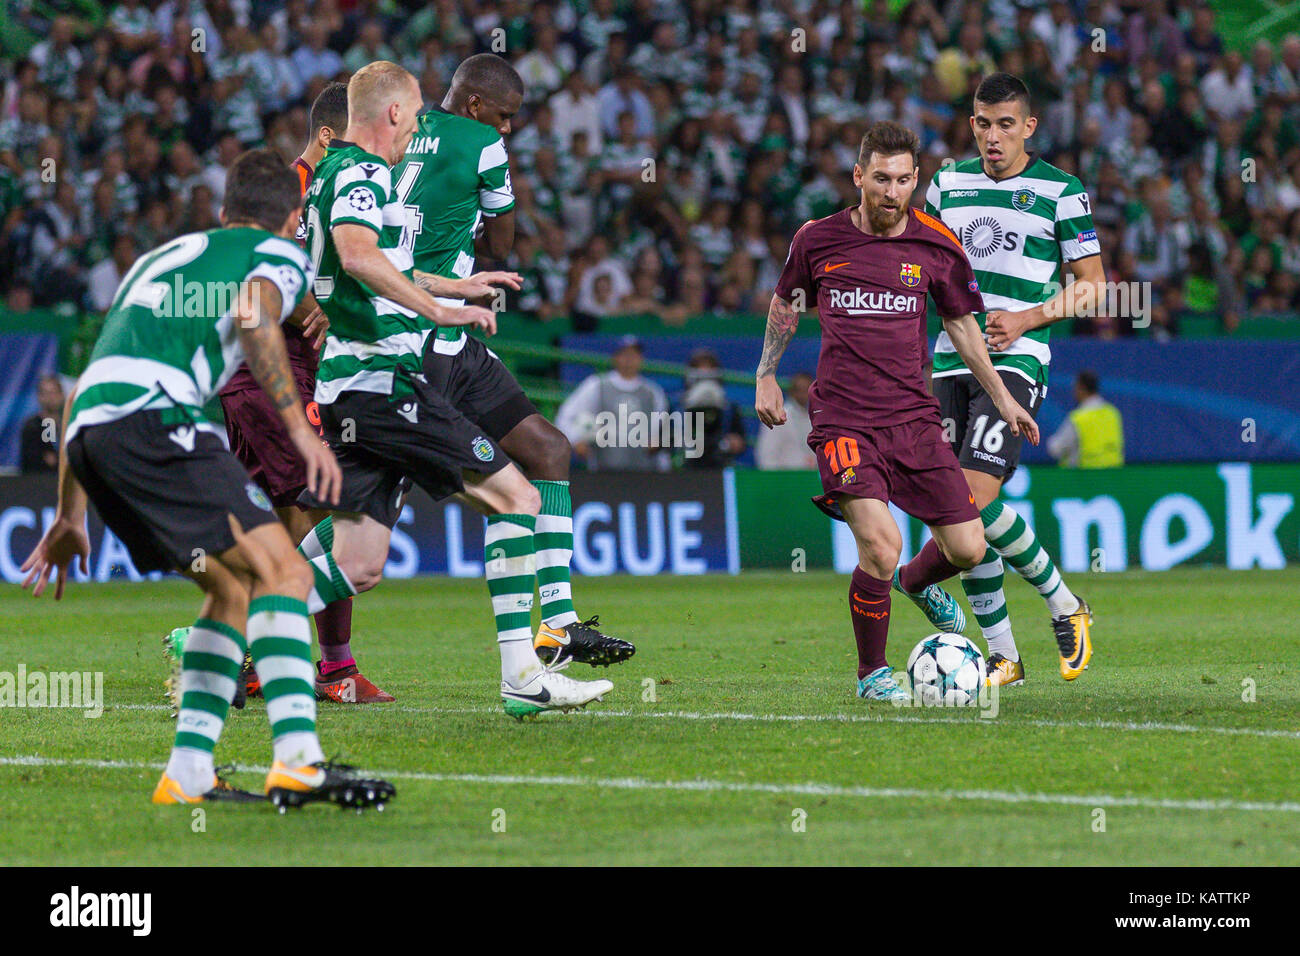 Lisbon, Portugal. 27th Sep, 2017. Barcelona's forward from Argentina Lionel Messi (10) during the game of the 2nd round of the UEFA Champions League Group D, Sporting CP v FC Barcelona Credit: Alexandre de Sousa/Alamy Live News Stock Photo